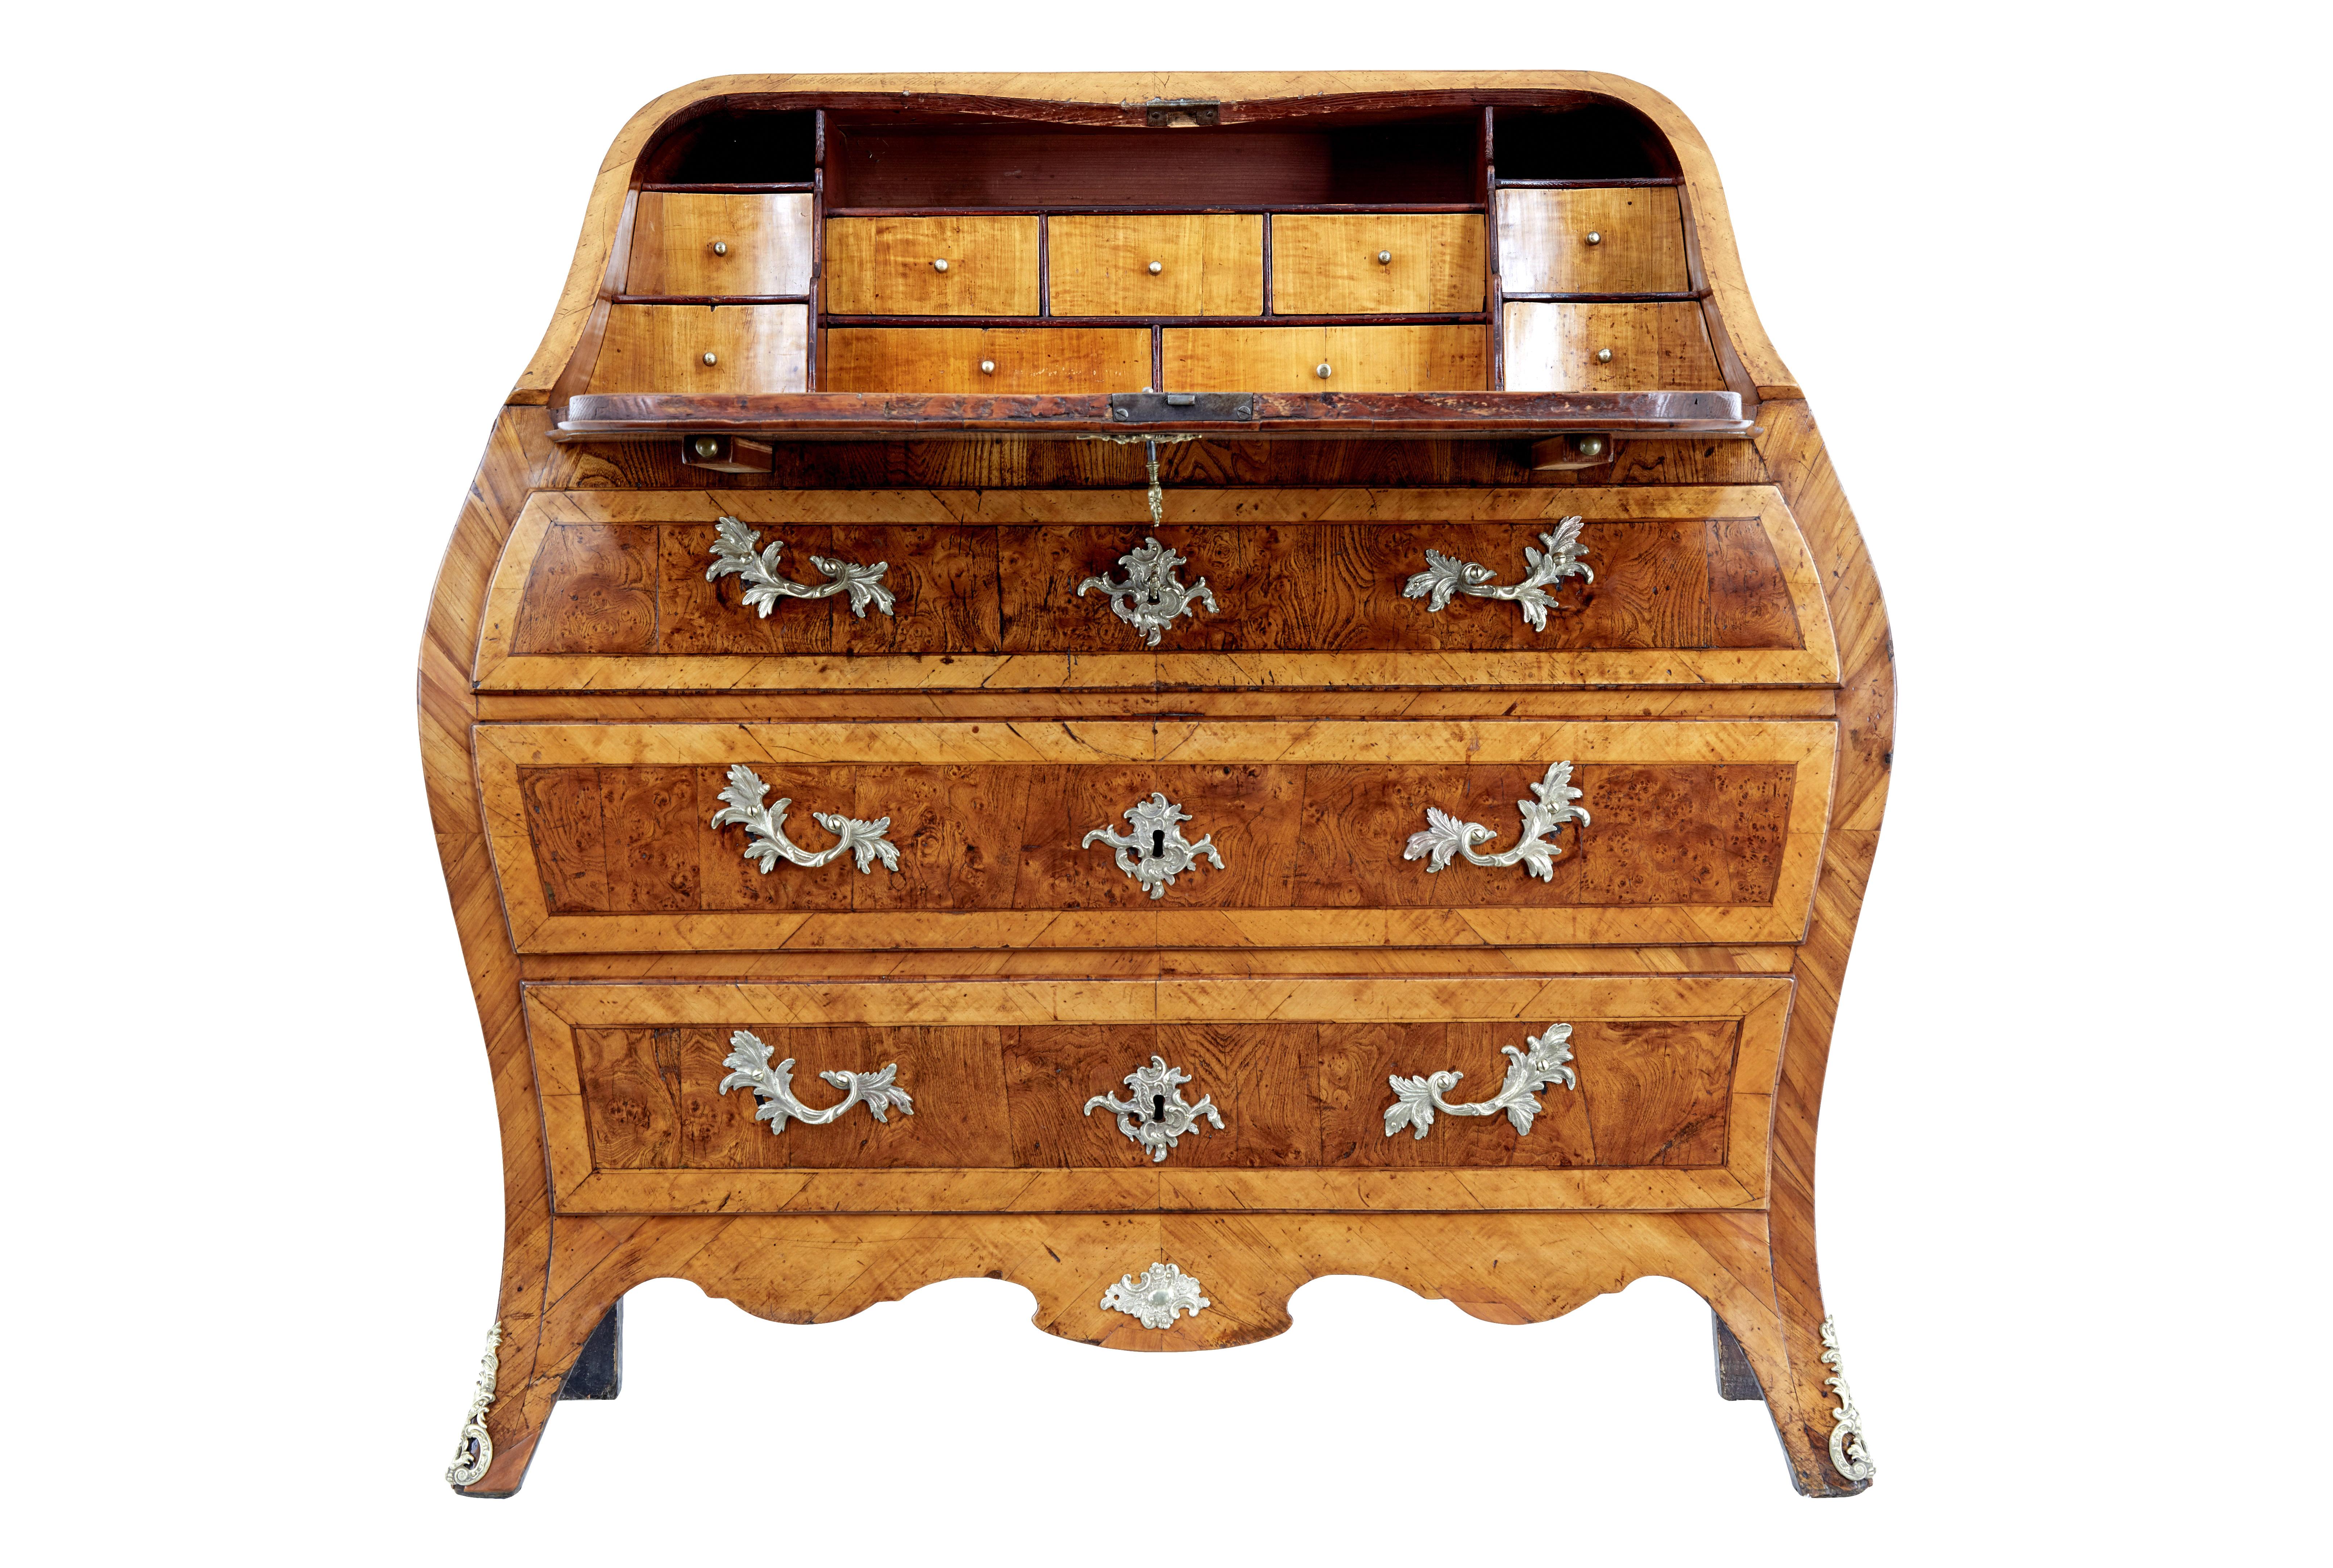 Rococo 18th century yew and elm bureau desk circa 1750.

Stunning Swedish rococo period bombe shaped bureau.   Beautifully made from yew wood and elm, using various techniques such as parquetry, inlay and cross banding.

Top surface and sides